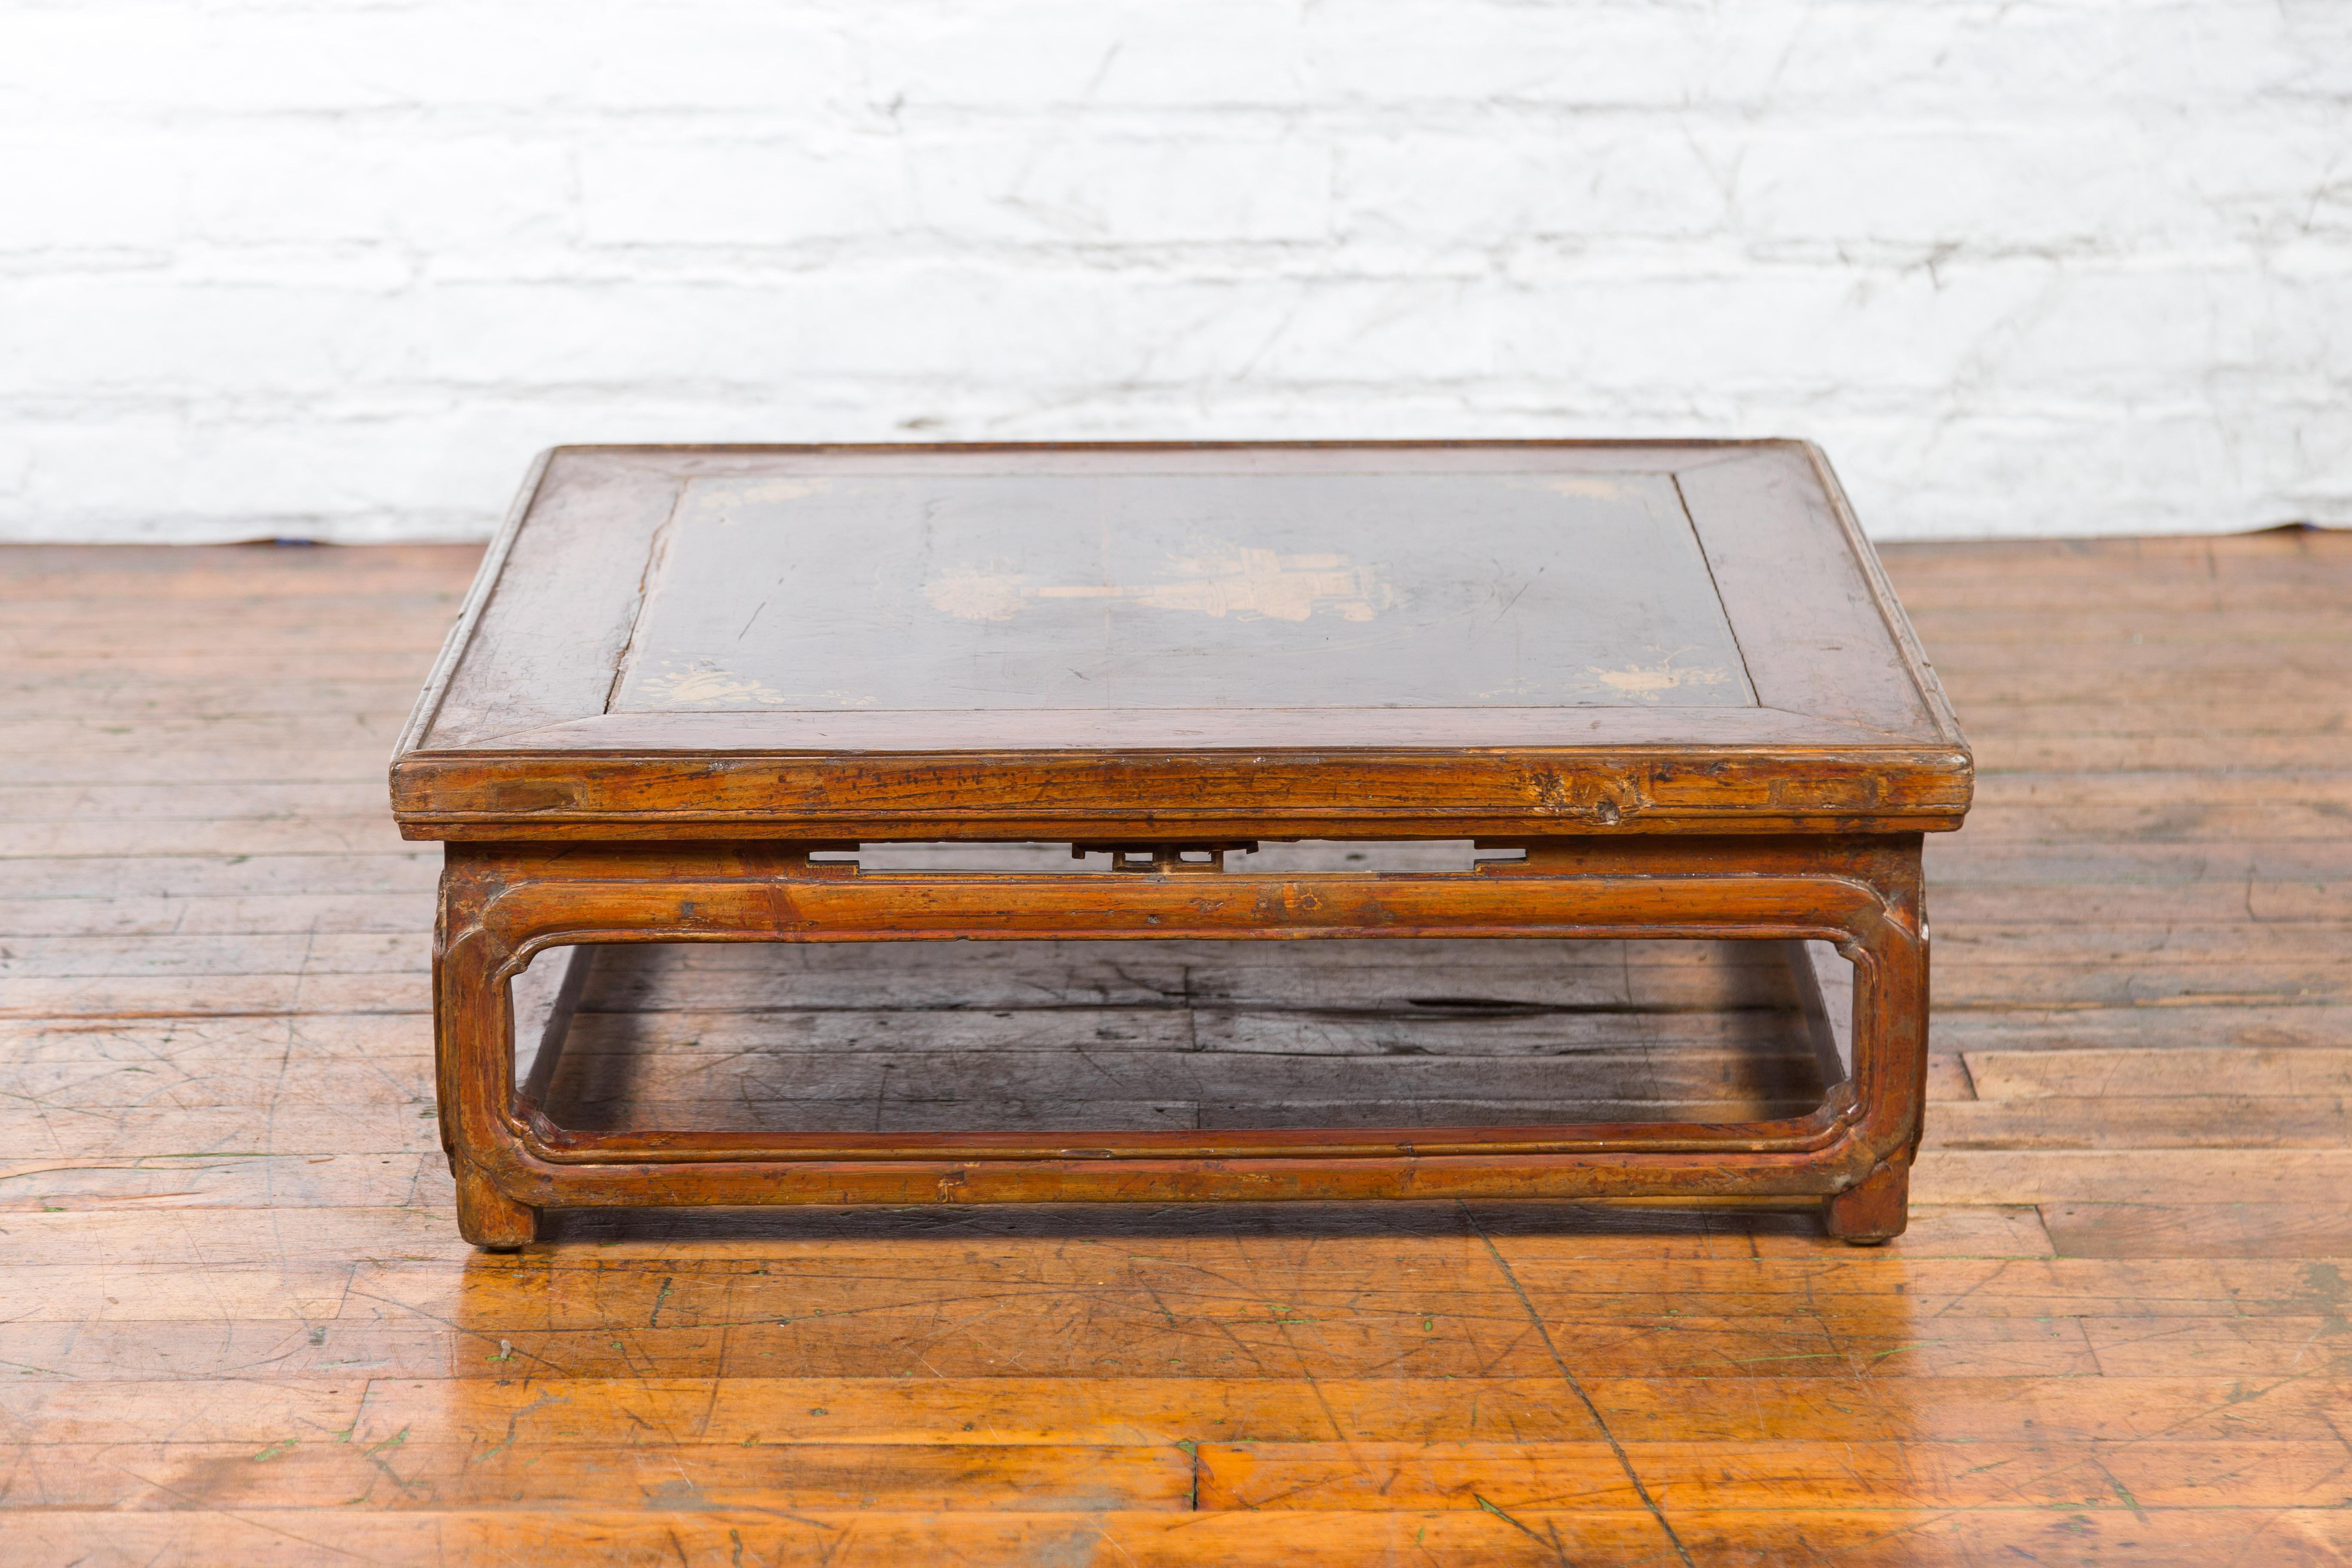 Qing Dynasty 19th Century Chinese Low Kang Coffee Table with Painted Décor For Sale 5